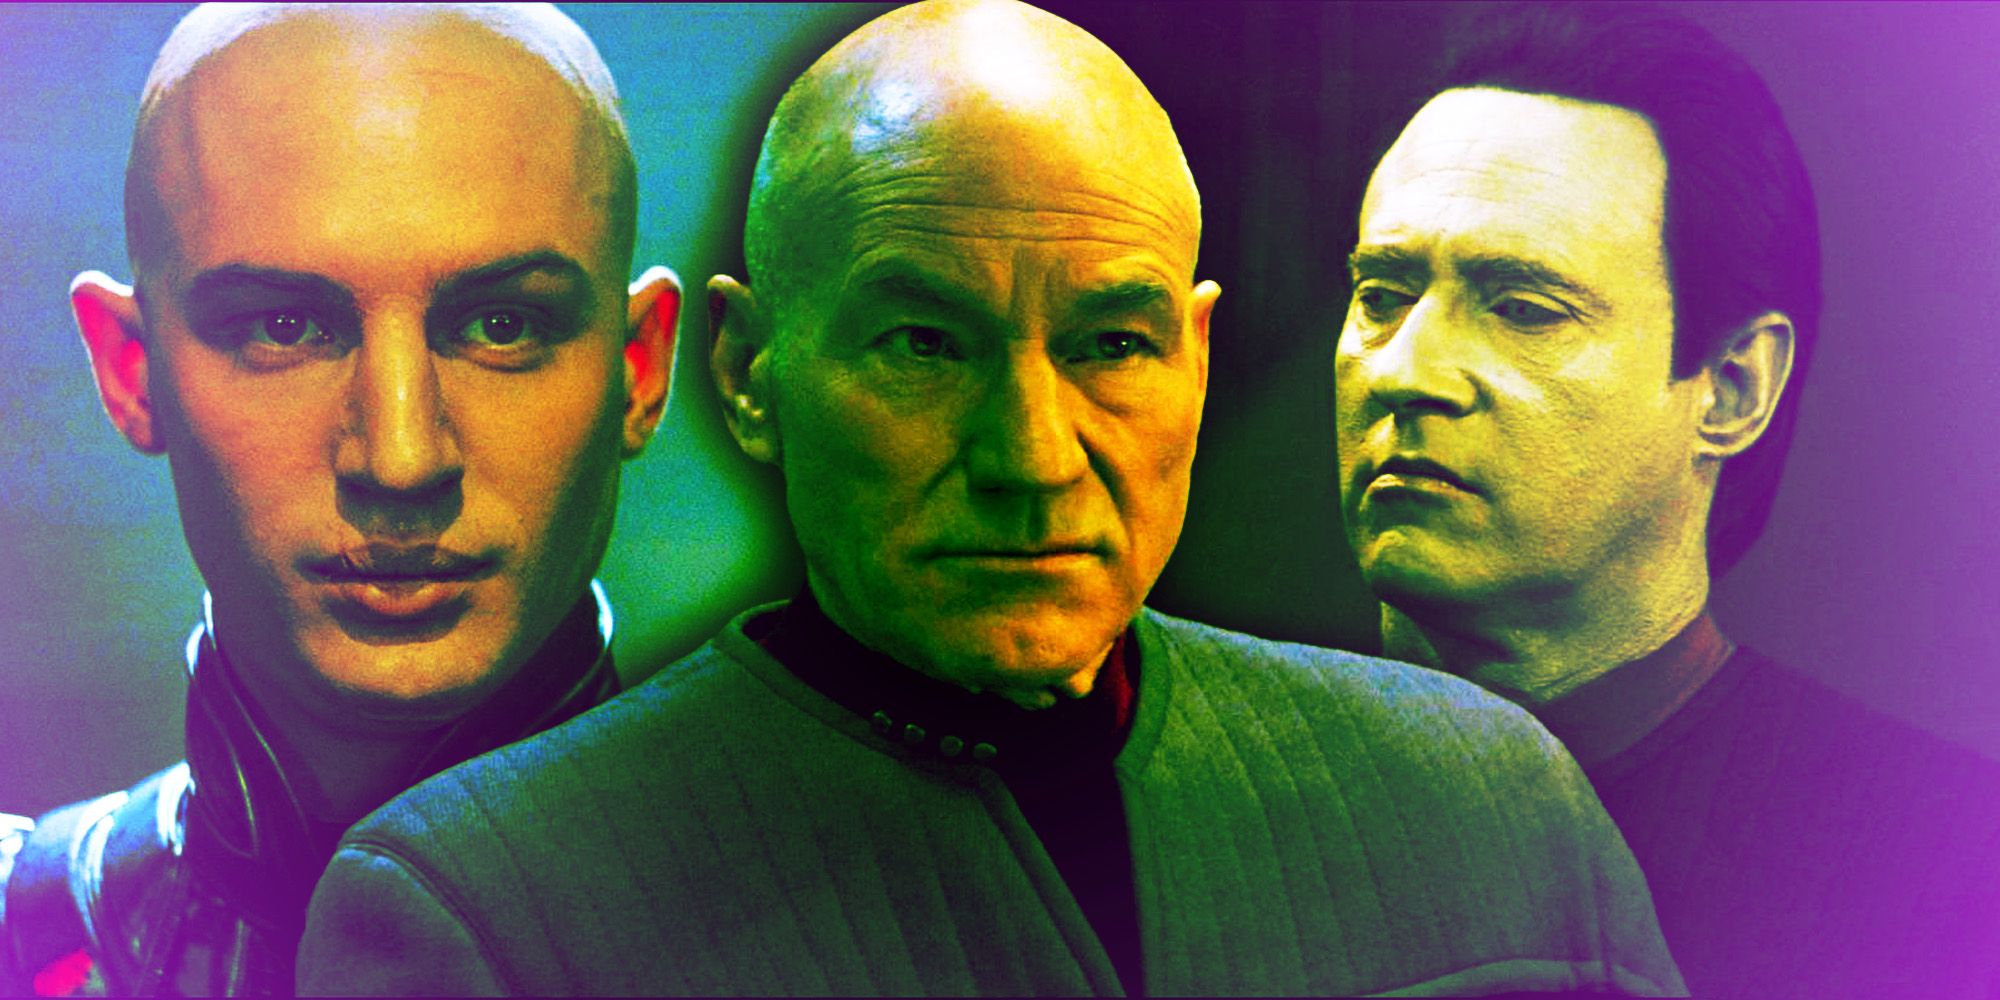 Tom Hardy as Shinzon, Patrick Stewart as Picard and Brent Spiner as Data